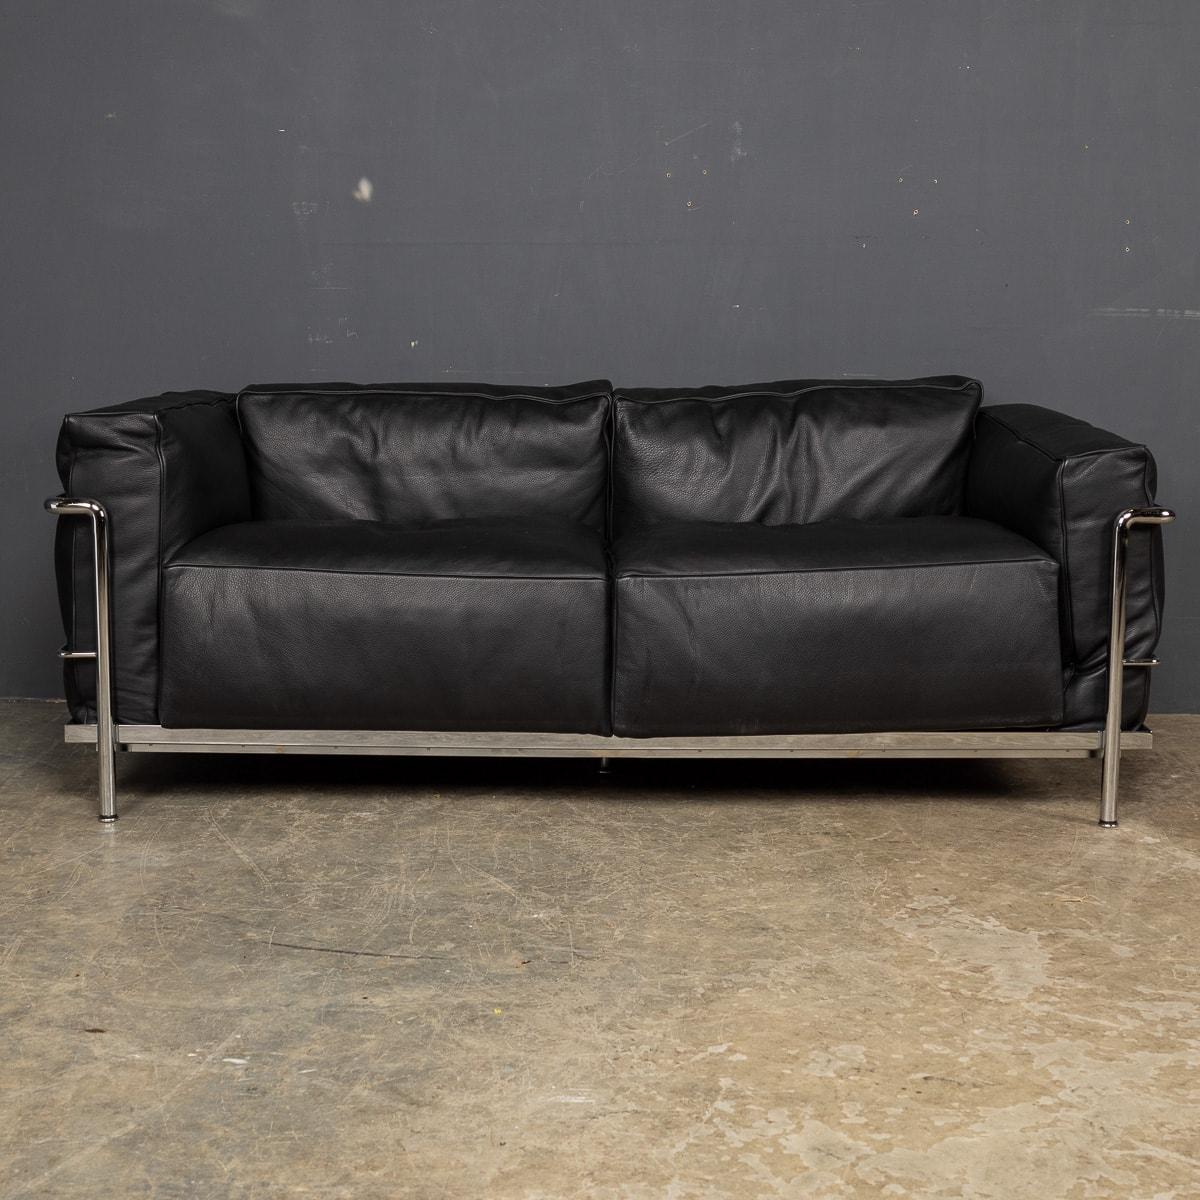 3 Fauteuil Grand Confort, Grand Modèle, Deux Places by Le Corbusier, designed by Pierre Jeanneret, Charlotte Perriand for Cassina is a 2-seater sofa made with a chromed structure and upholstered cushions made of leather.

CONDITION
In Great